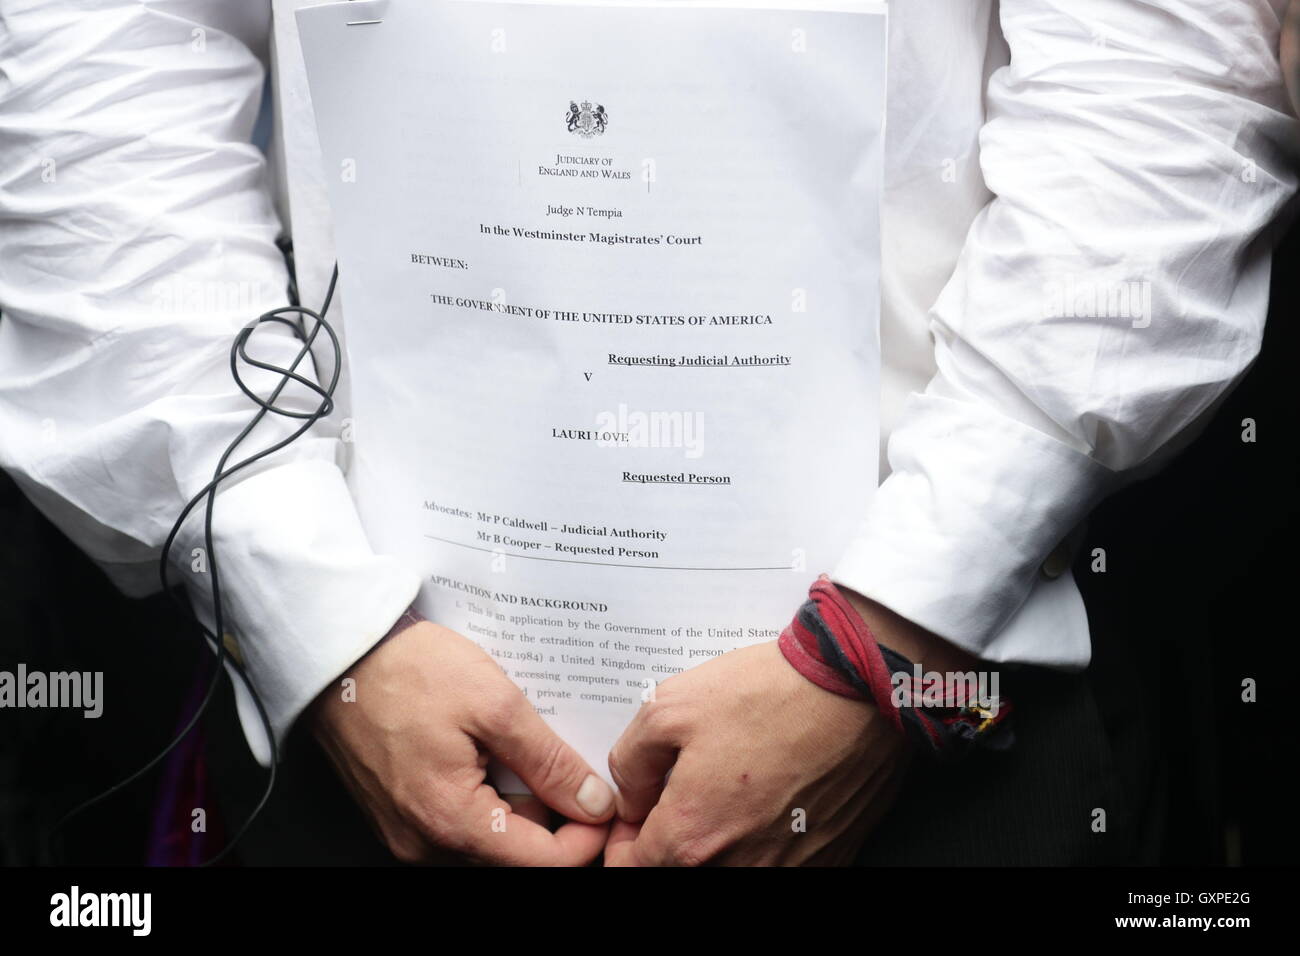 Lauri Love, who is accused of hacking into US Government computers, holds court papers outside Westminster Magistrates' Court, London, where a judge ruled that he can be extradited to the US from Britain to stand trial. Stock Photo